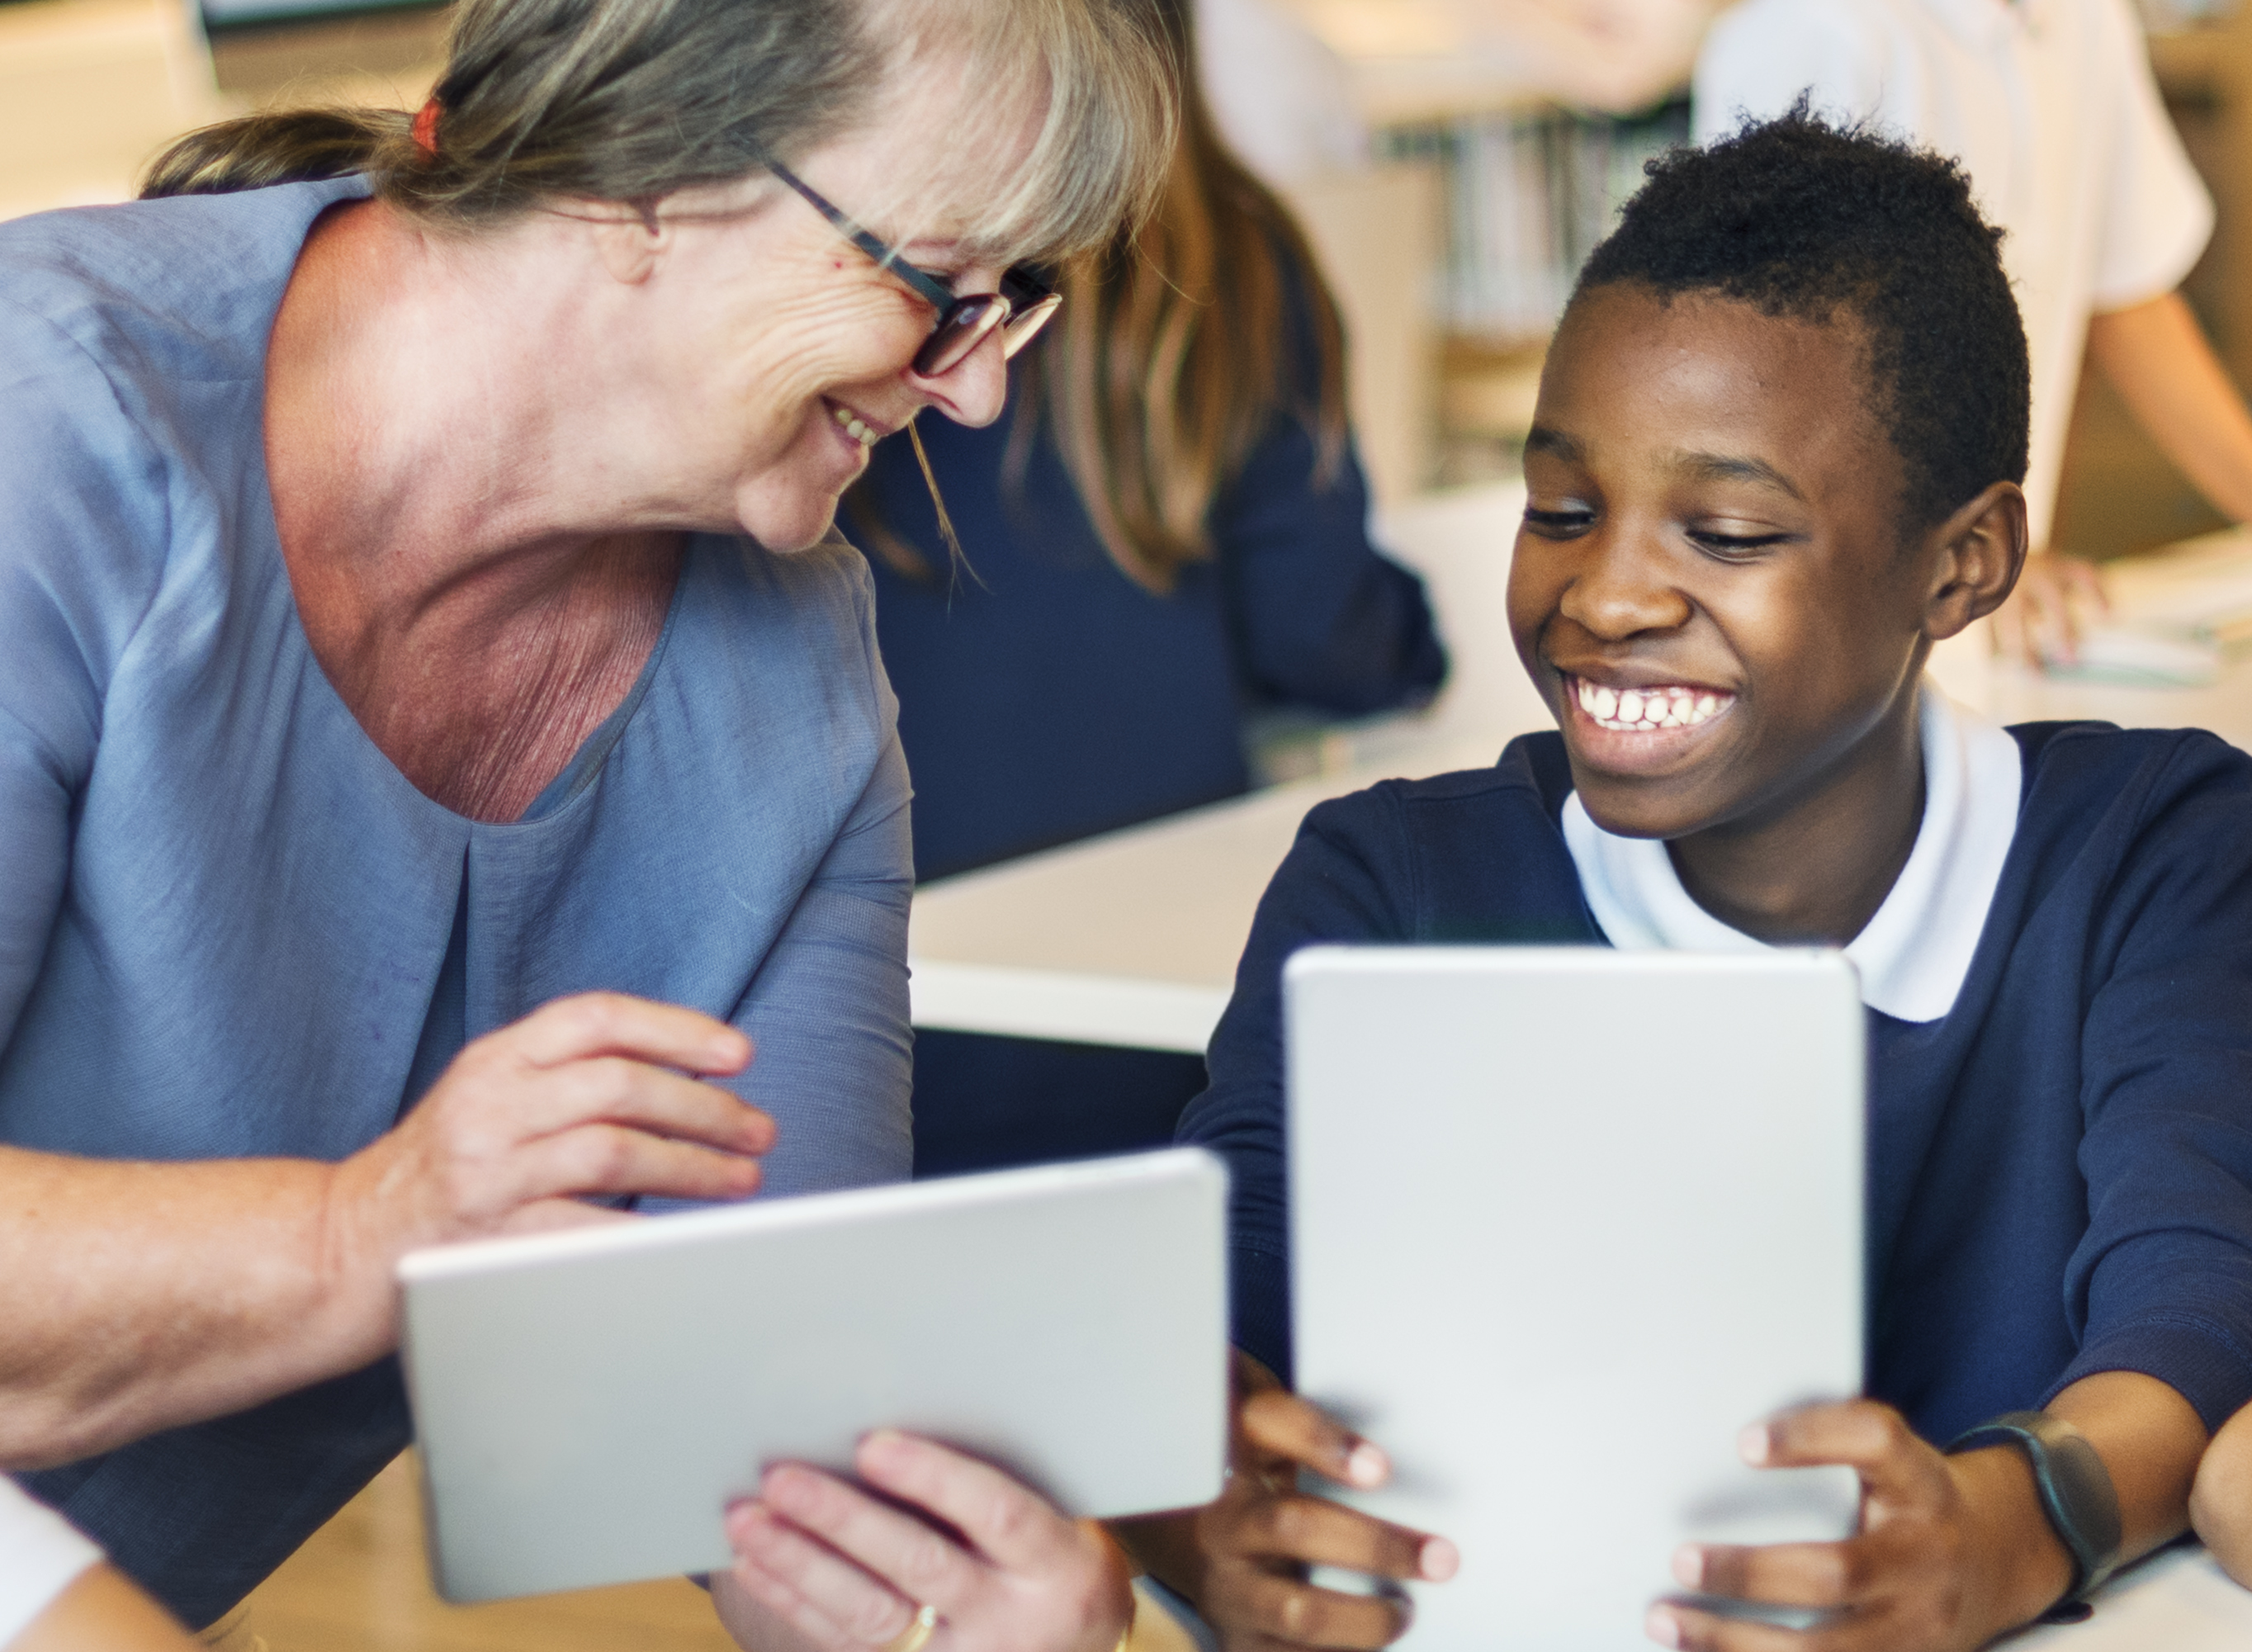 Embracing Technology for Special Education Students: What Do the New Federal Guidelines Mean for Our District?